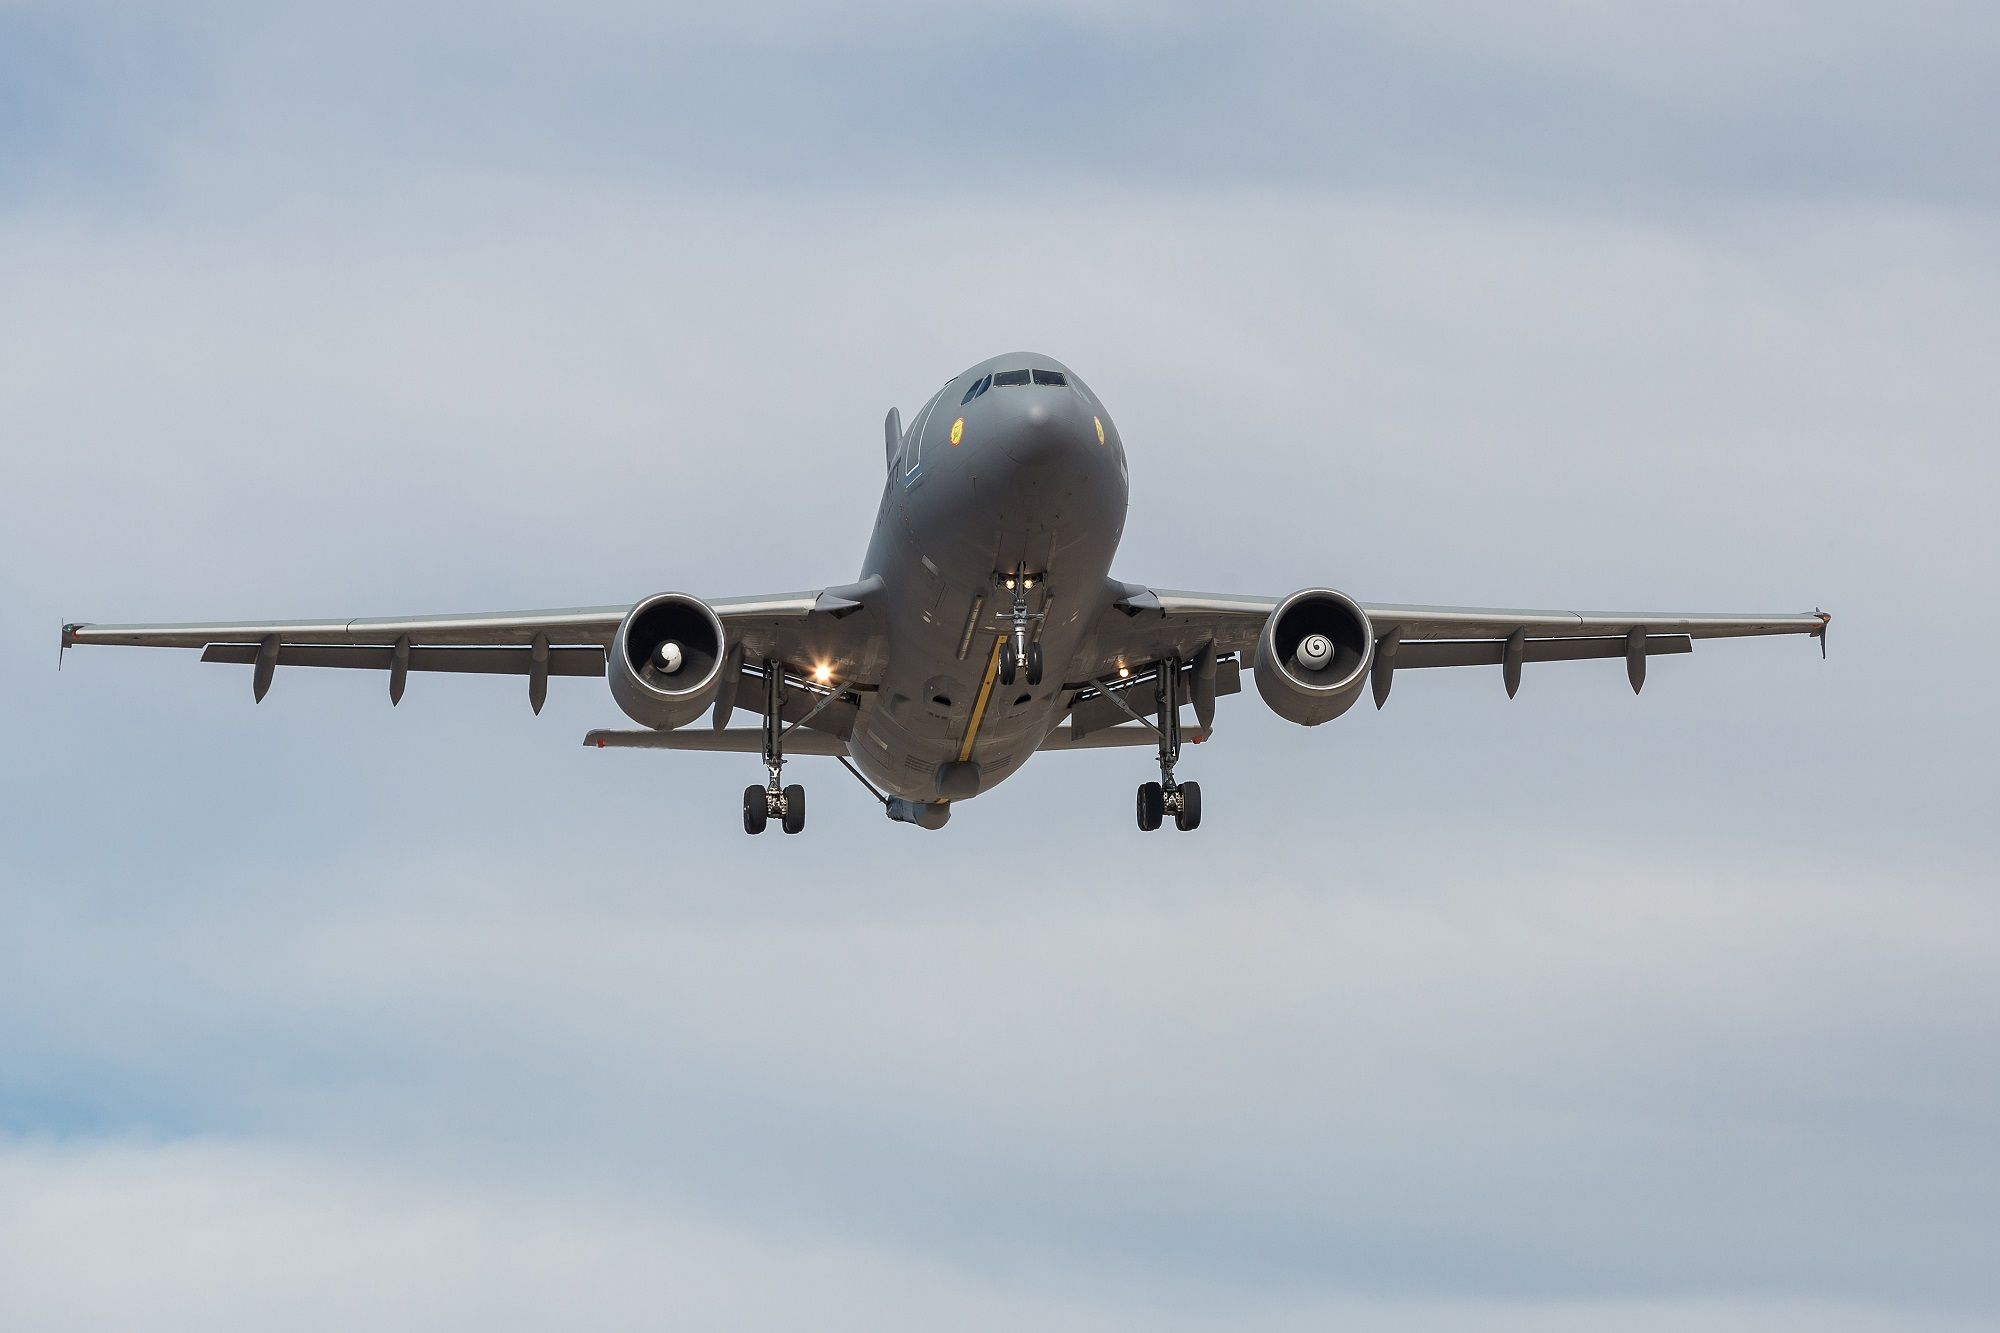 Airbus successfully completed a flight demonstration of a connected airborne battlespace scenario, centred on a MRTT aircraft. (Image: Airbus)